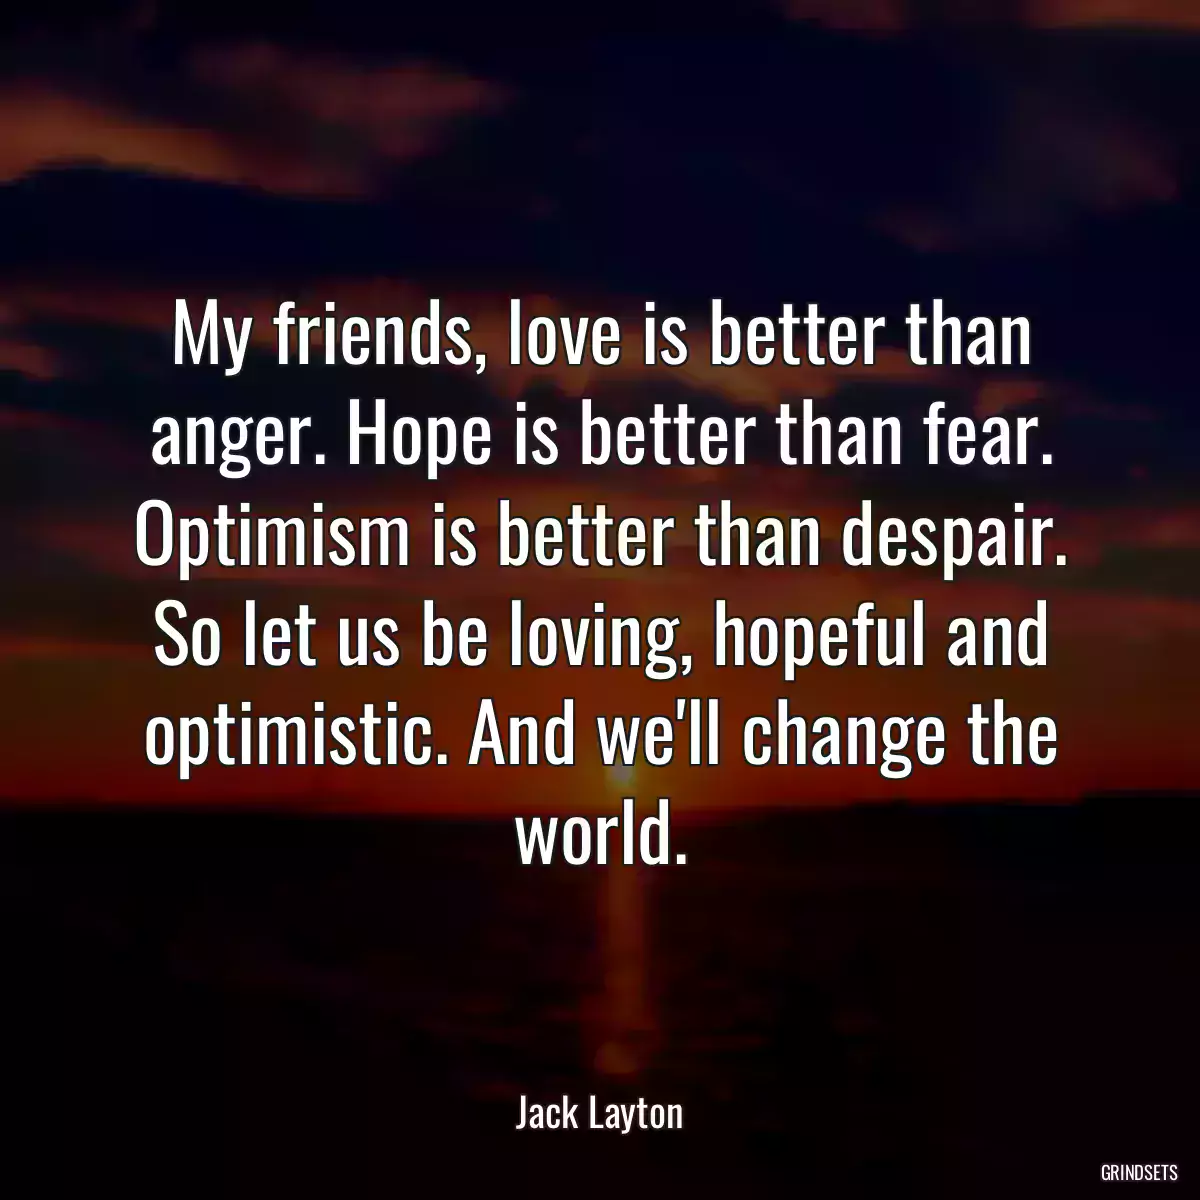 My friends, love is better than anger. Hope is better than fear. Optimism is better than despair. So let us be loving, hopeful and optimistic. And we\'ll change the world.